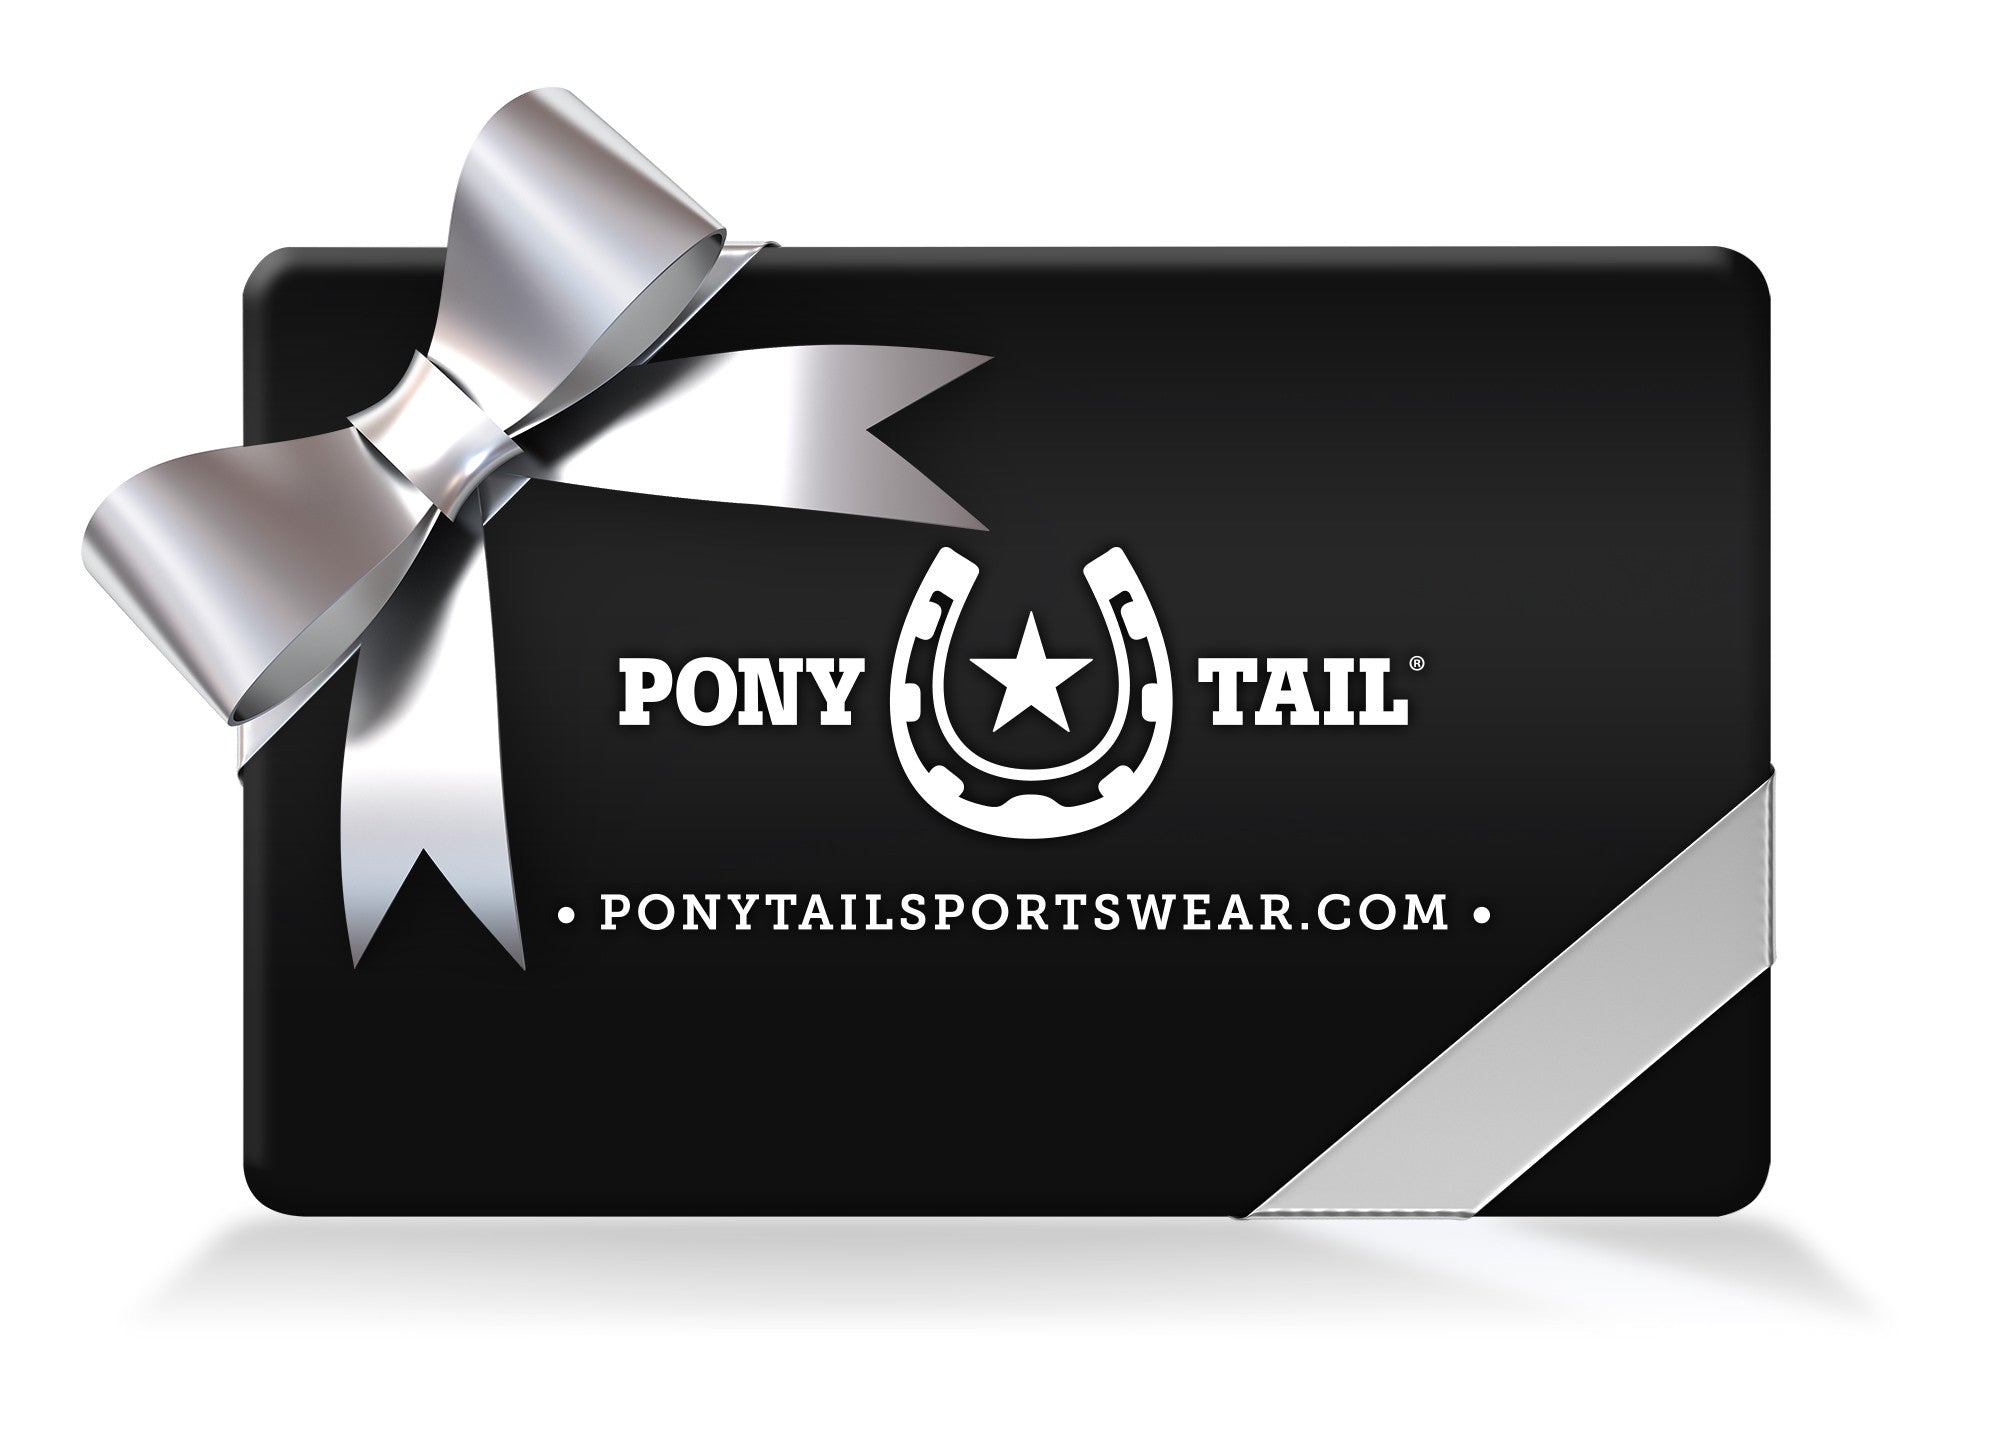 Gift Certificates are now available!